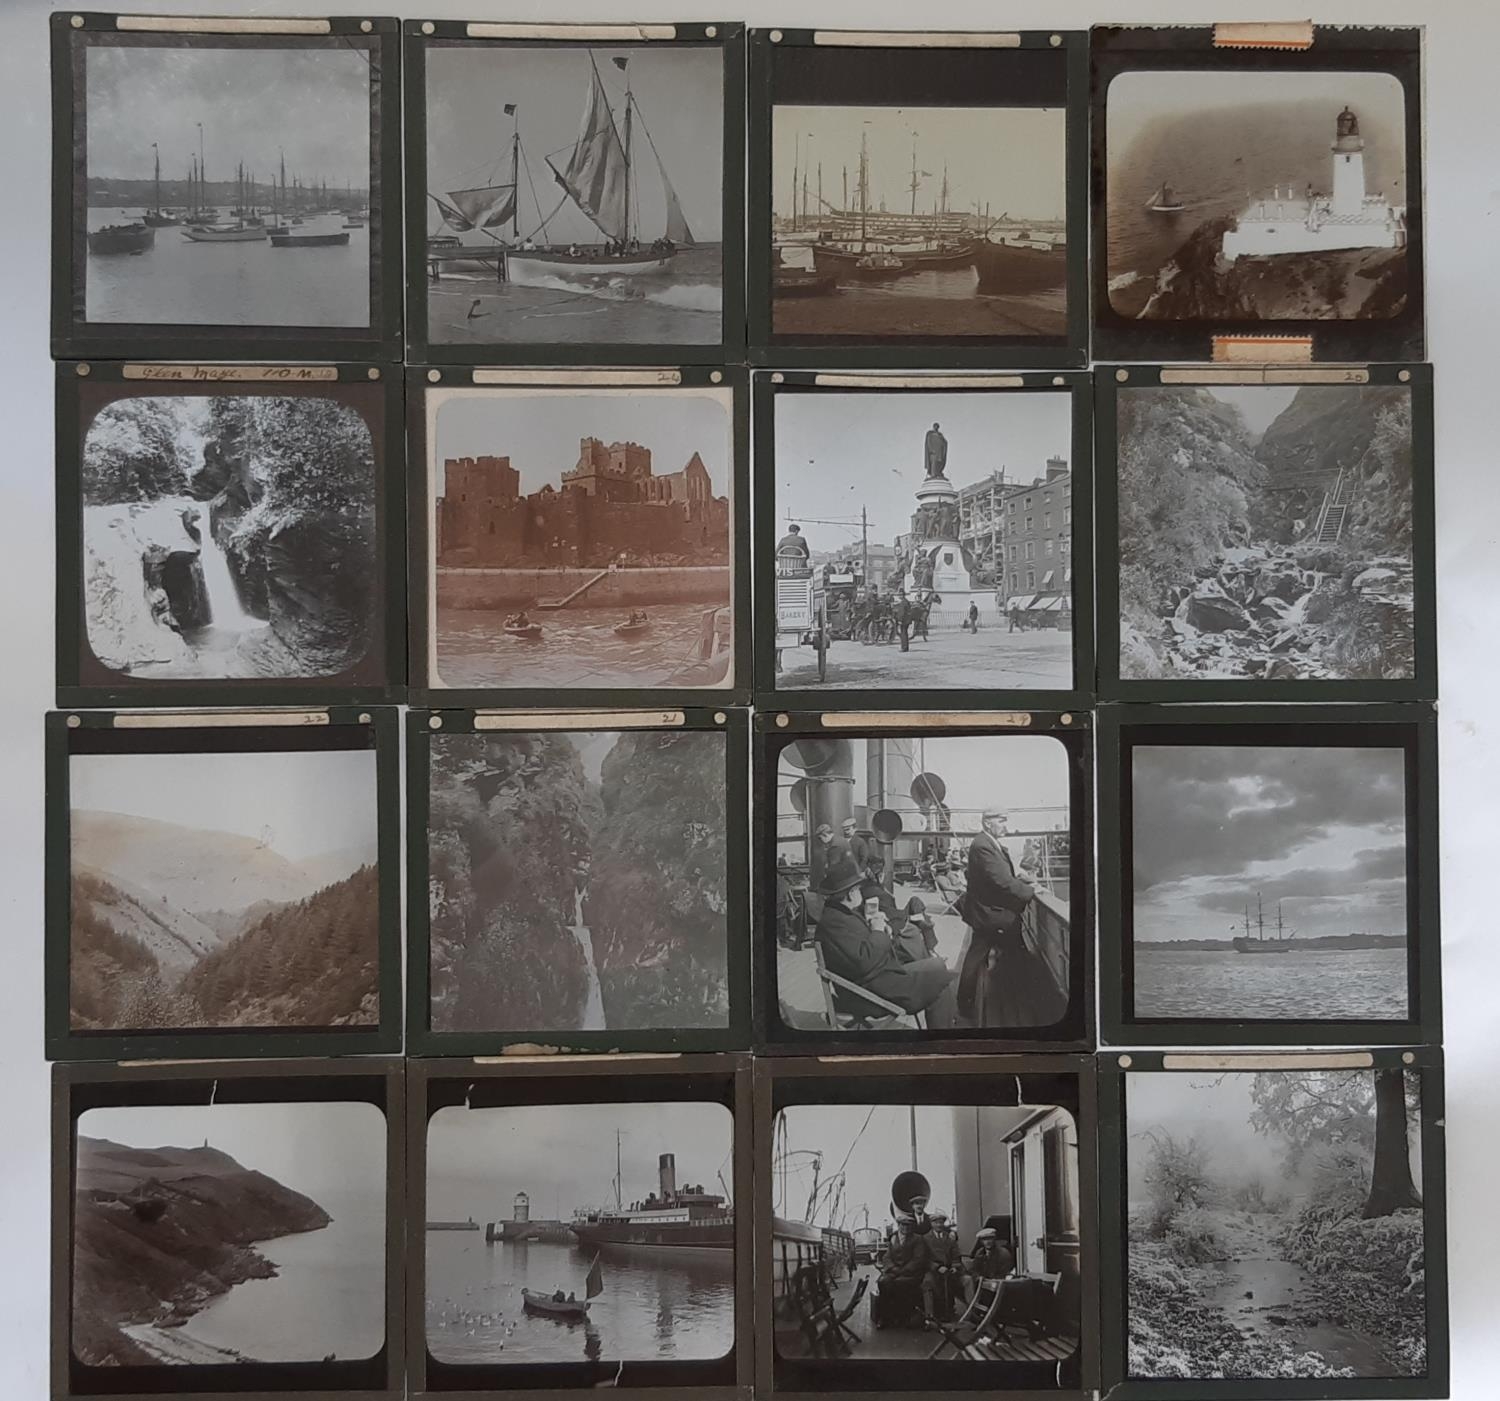 Isle of Man interest - over 60 monochrome slides showing views on and around the island, c.1890/1900 - Image 3 of 6